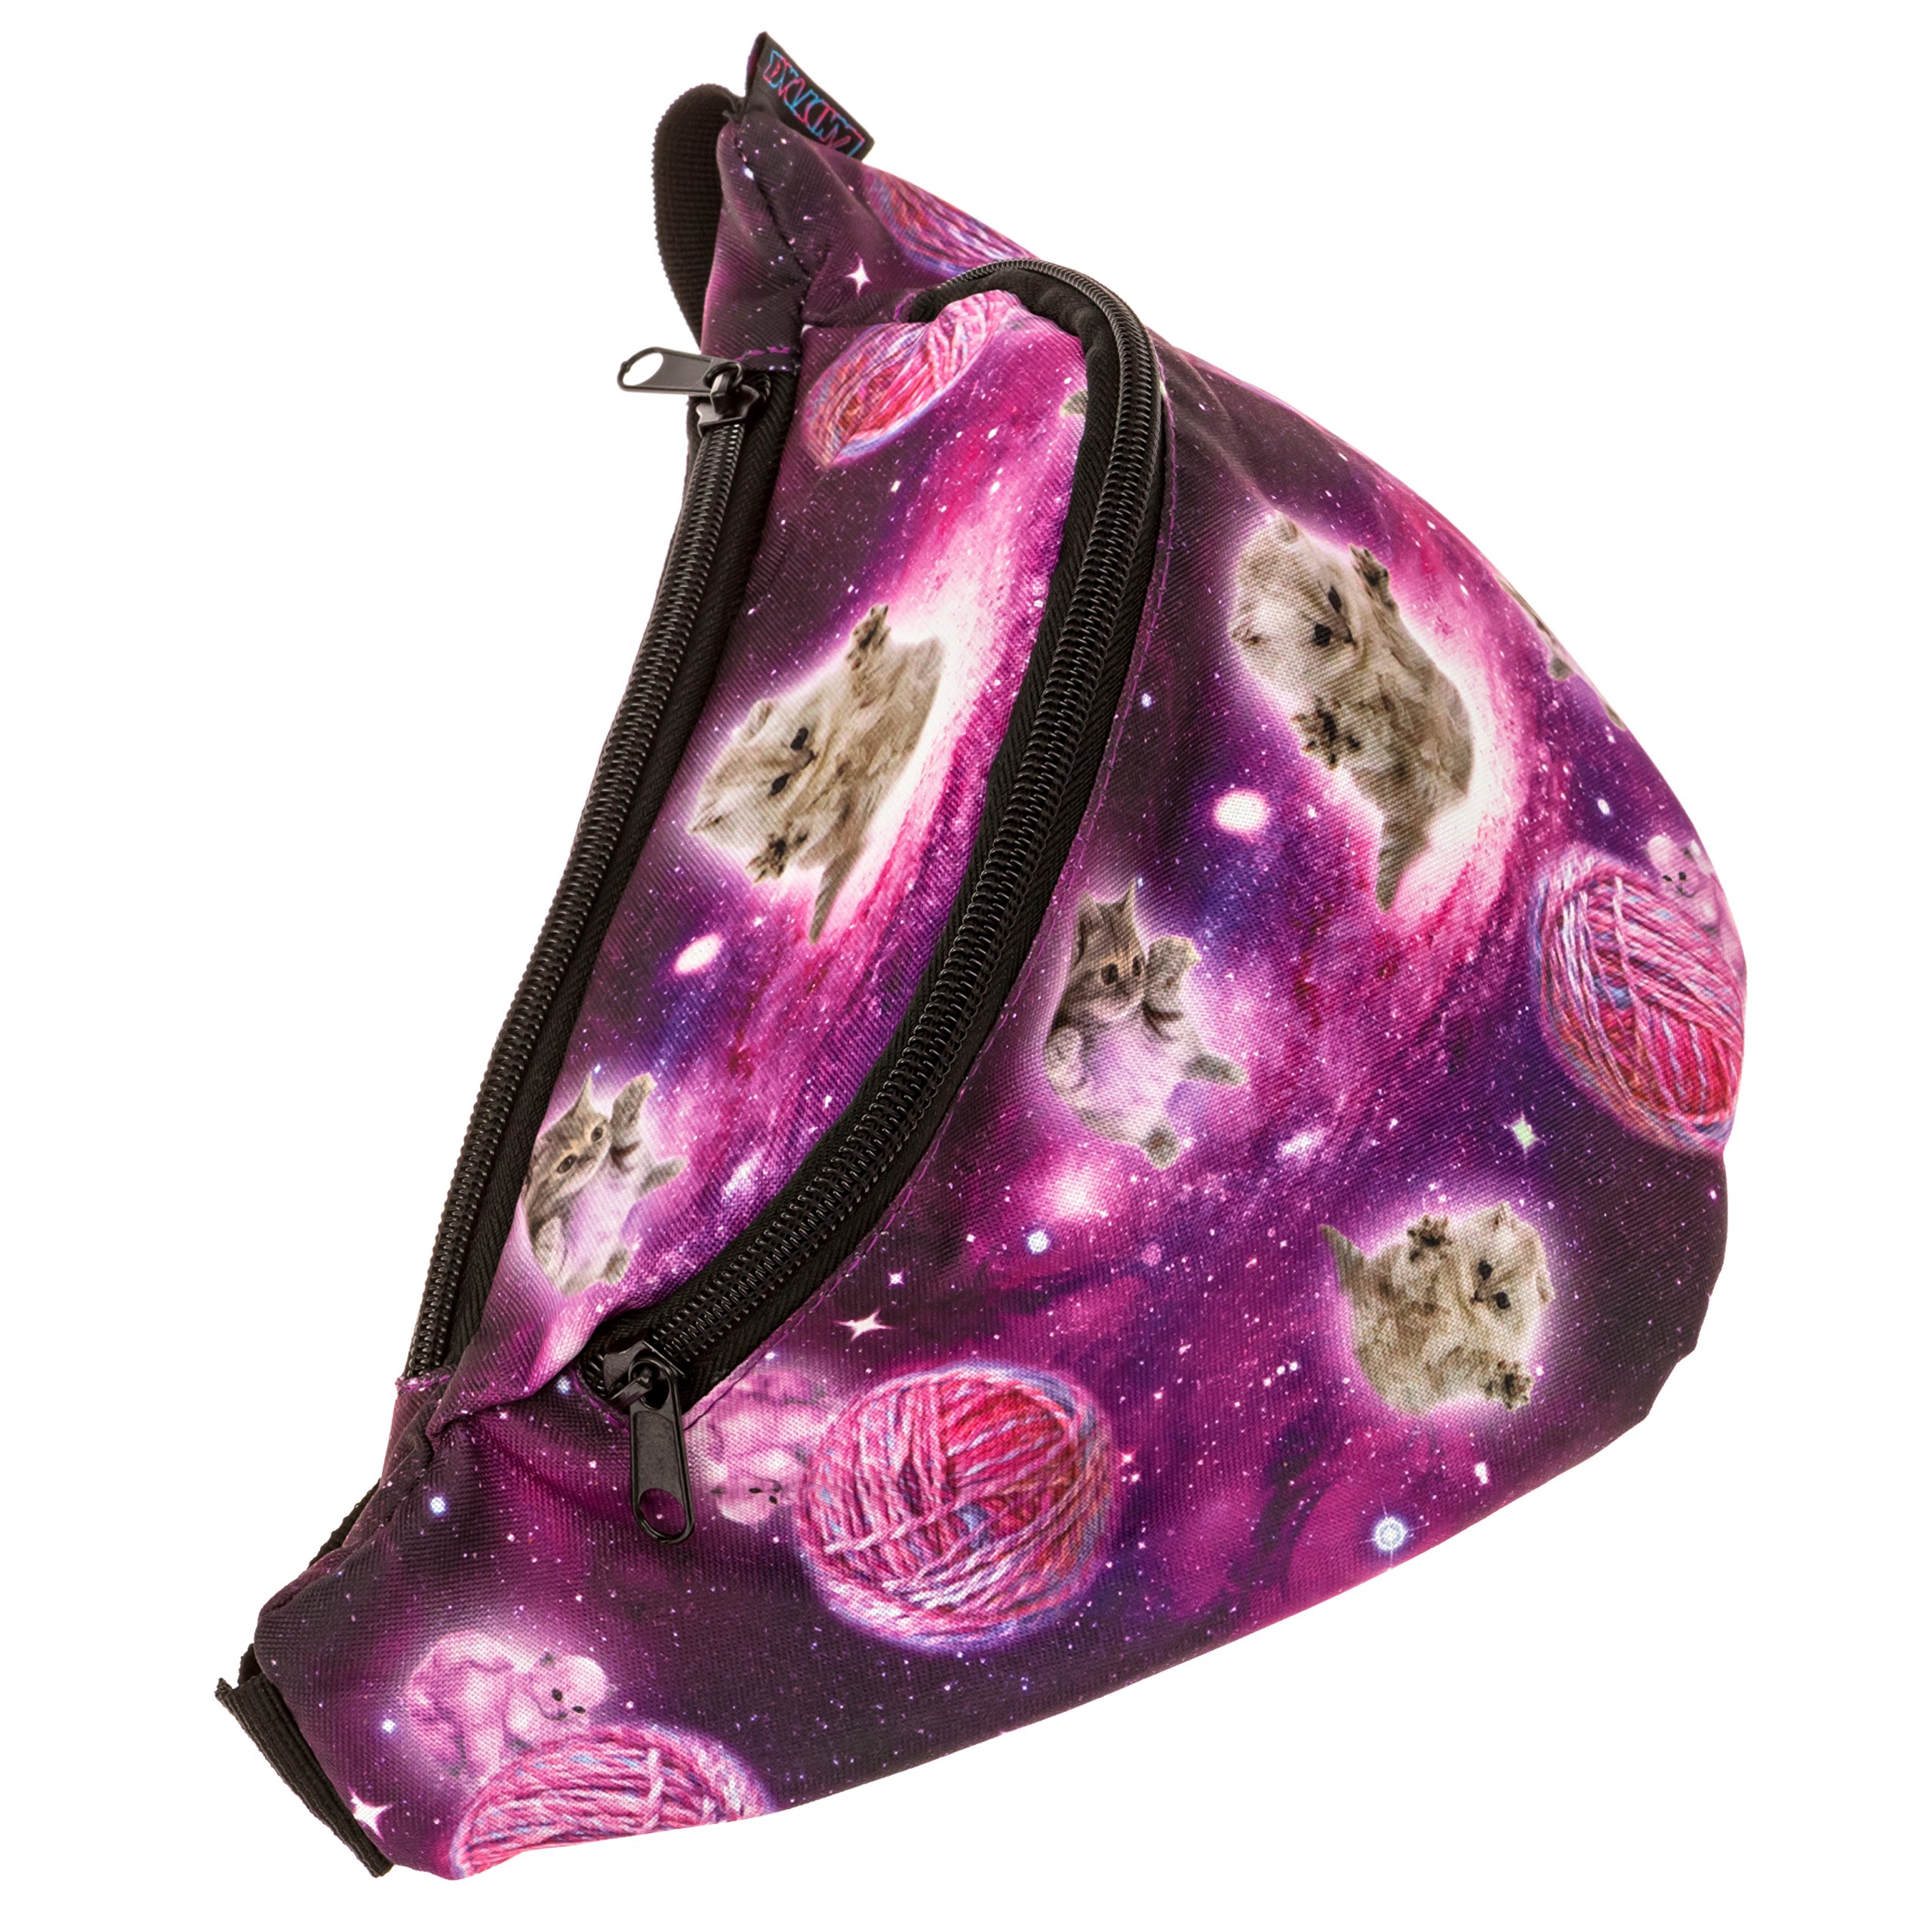 KANDYPACK Galaxy Cat Fanny Pack - Cute Cool Rave Festival Waist Bag with Hidden Pocket